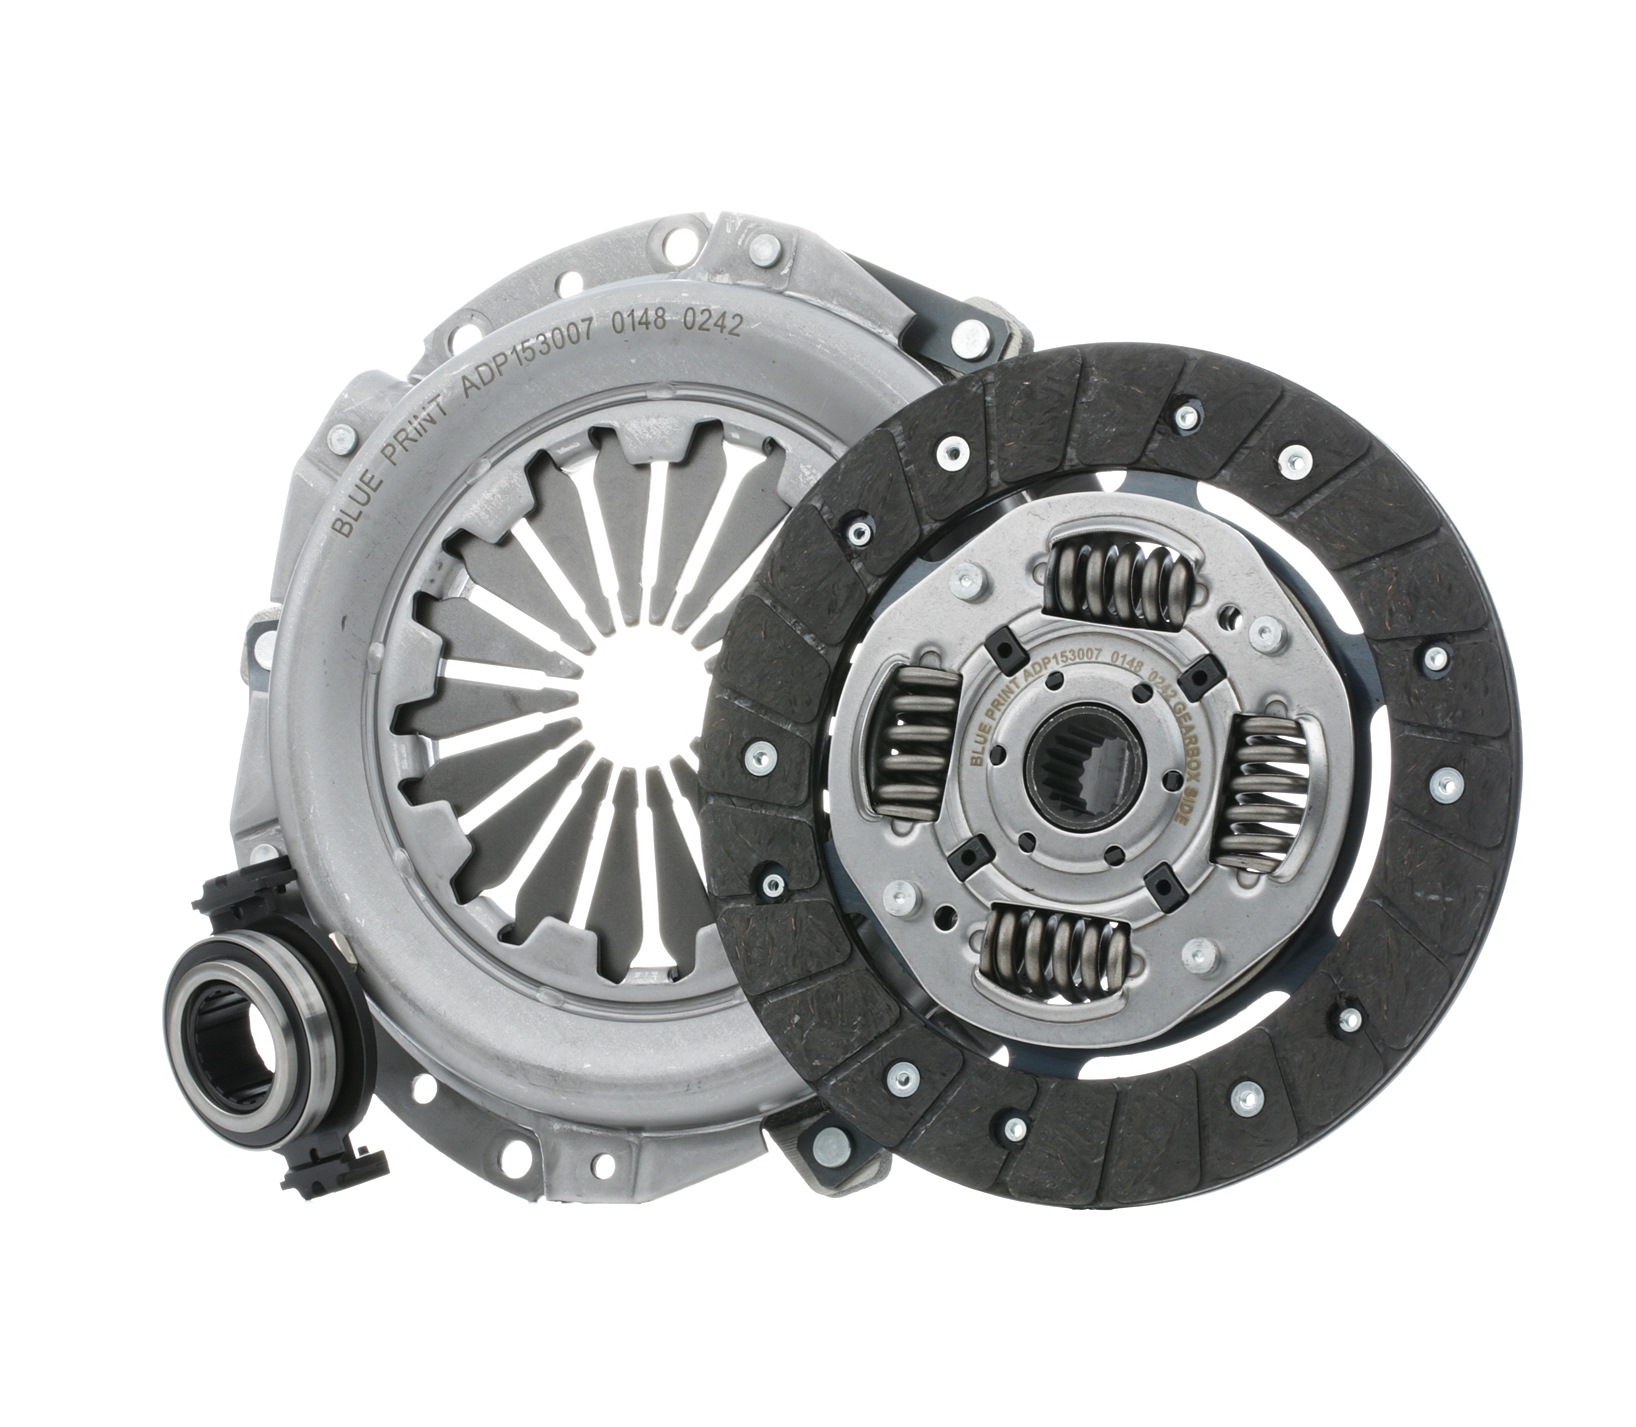 BLUE PRINT ADP153007 Clutch kit PEUGEOT experience and price